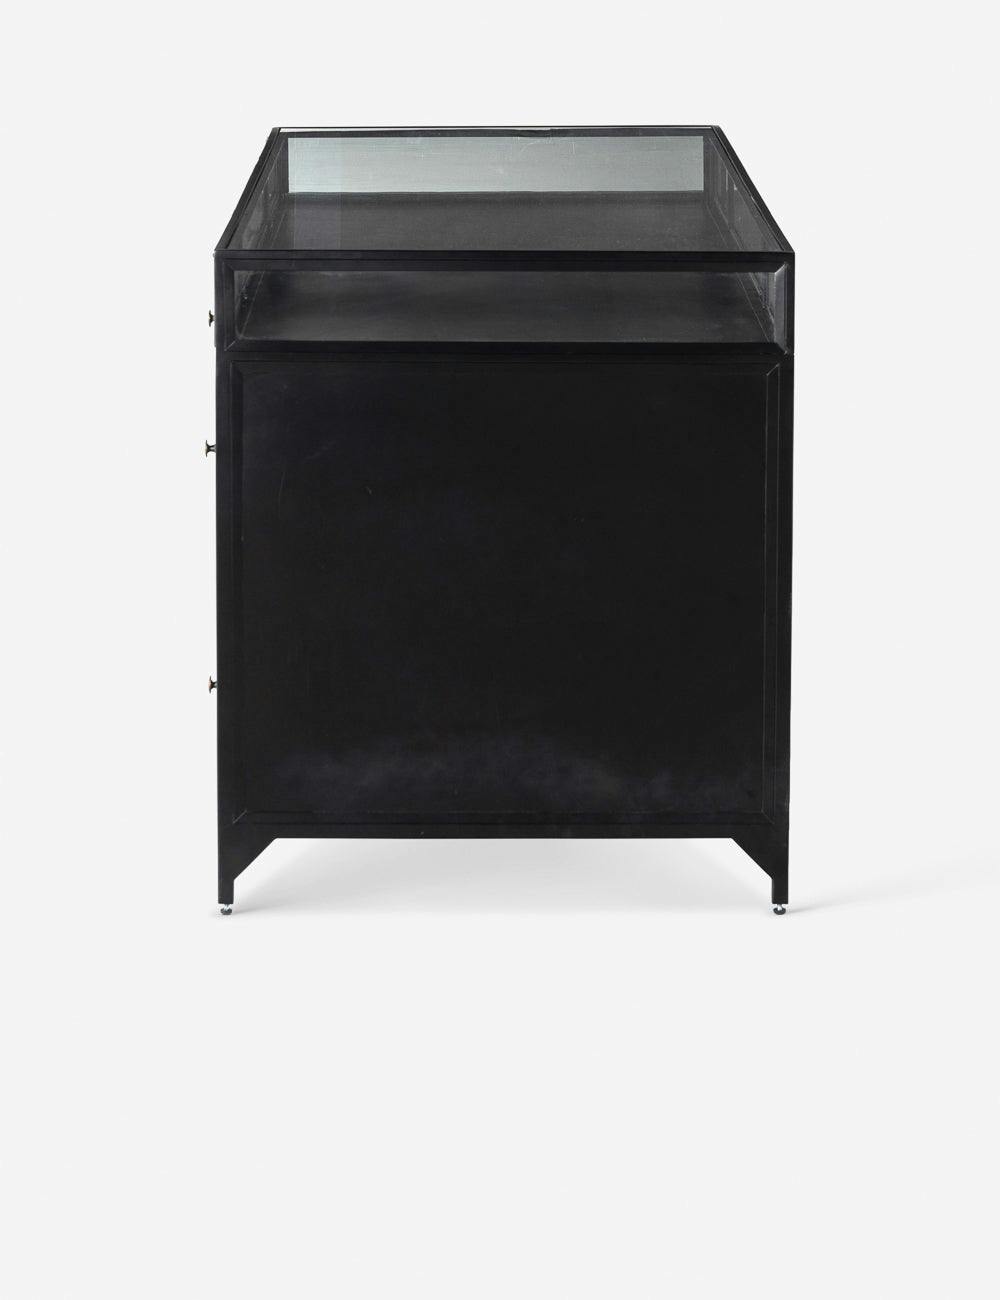 Sleek Black Executive Desk with Shadow Box Display and Filing Cabinet